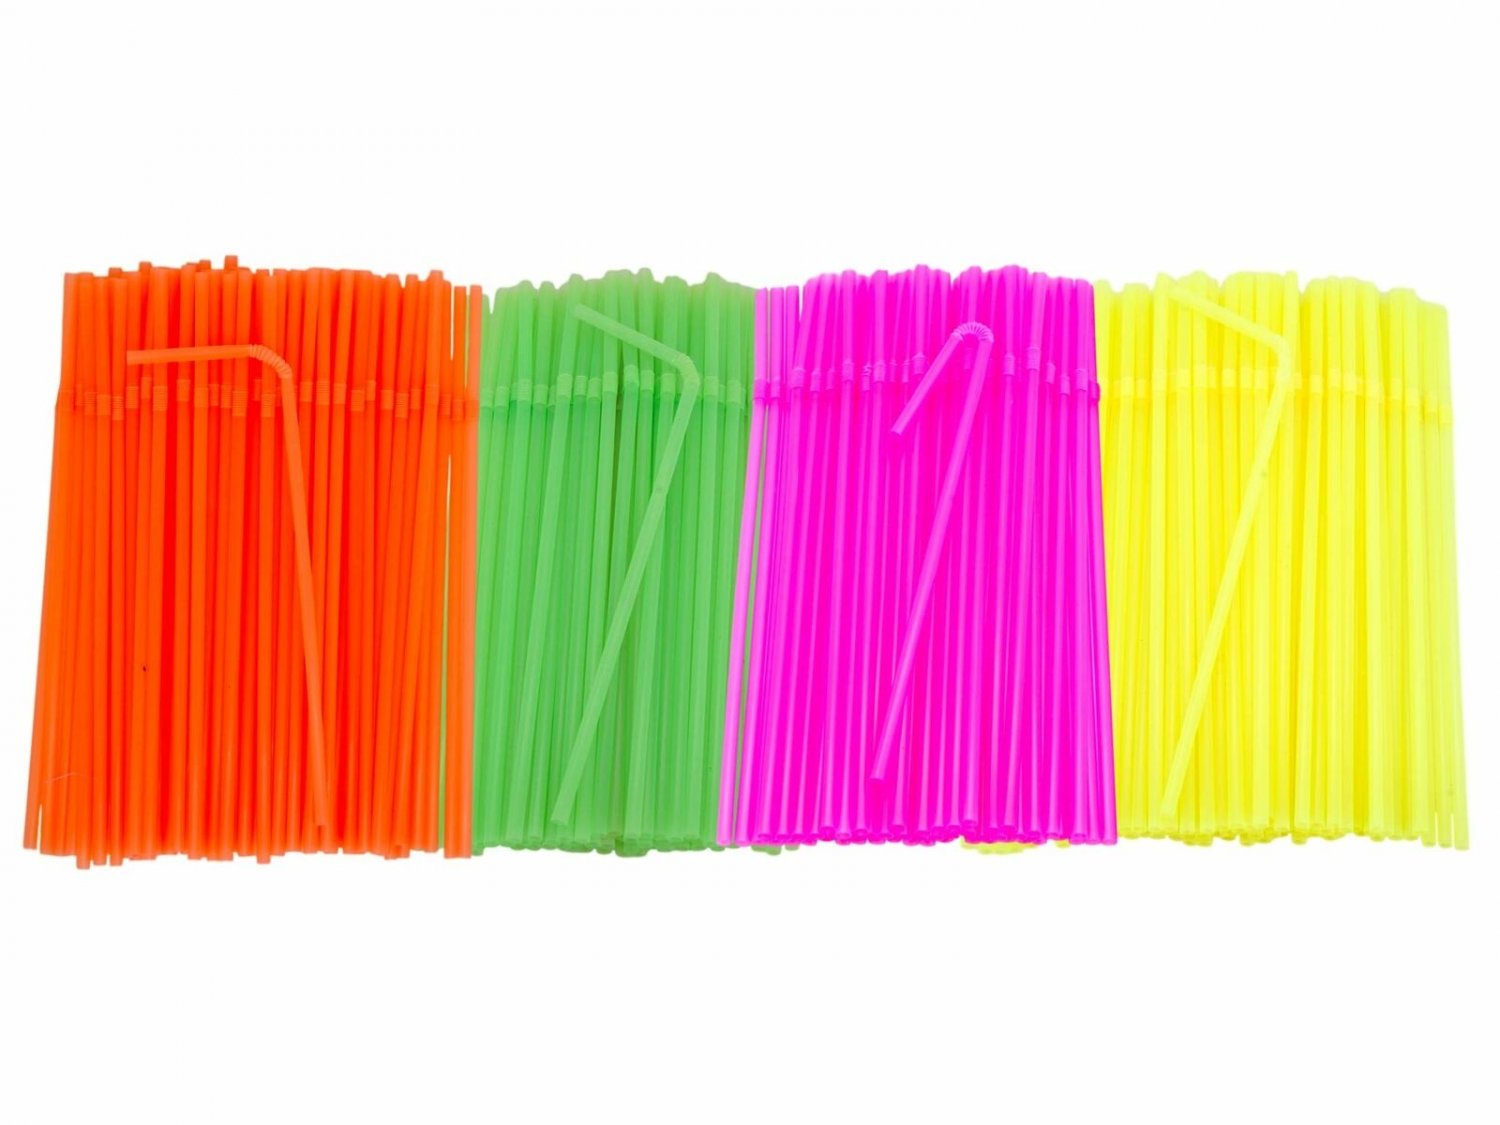 Flexible Plastic Drinking Straws (300 ct, Assorted Neon) Bendable Disposable